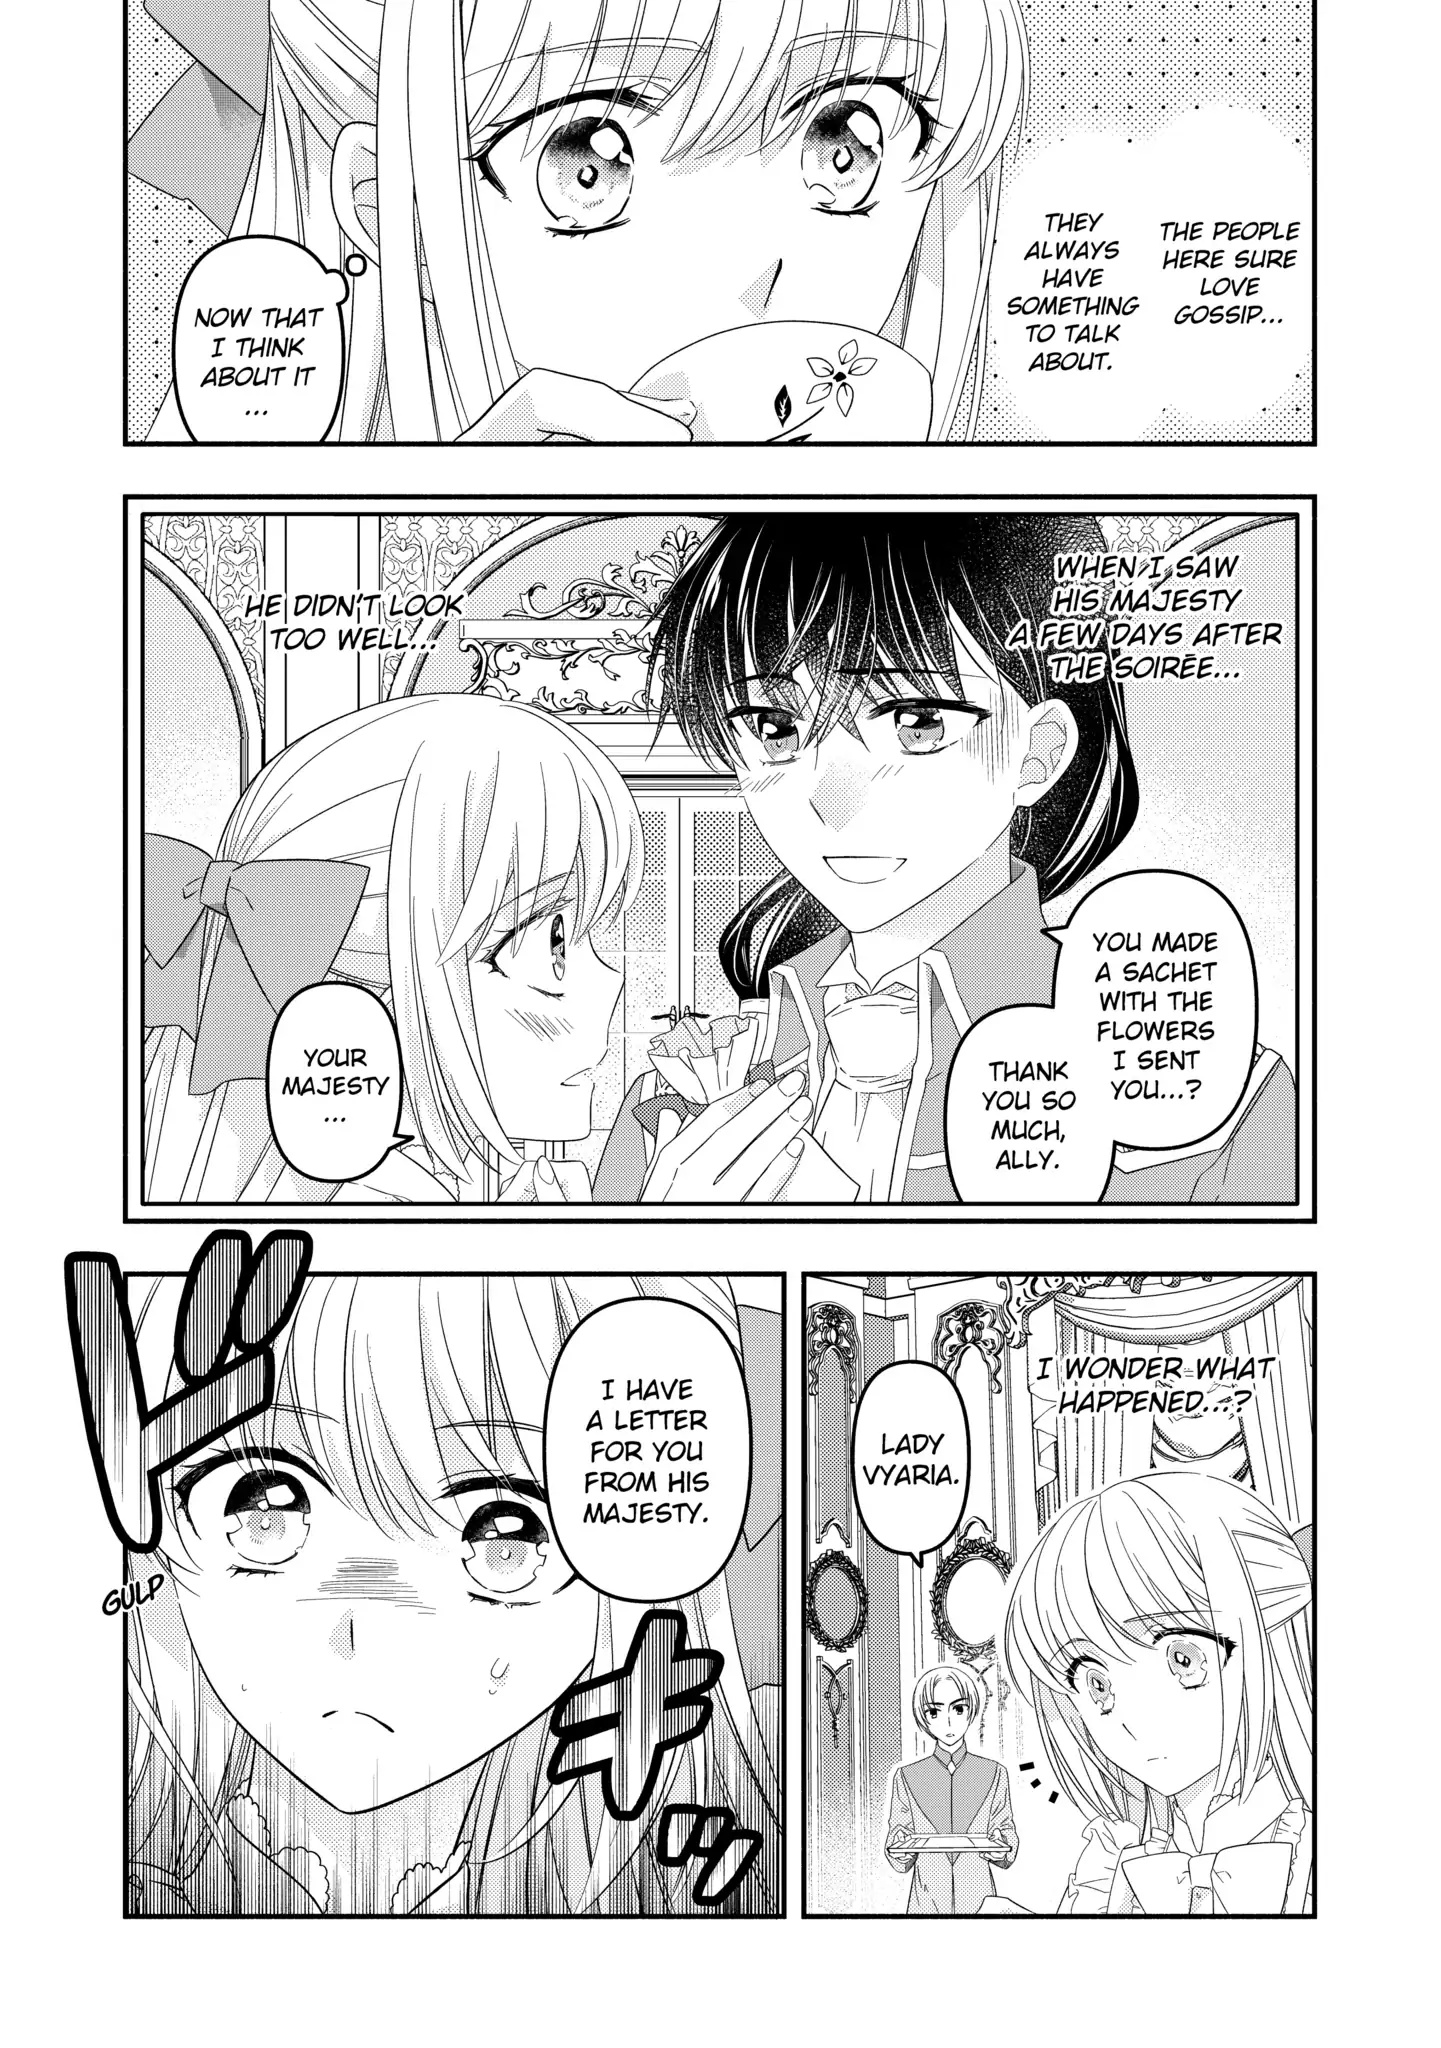 The Princess Of Blue Roses - Page 2